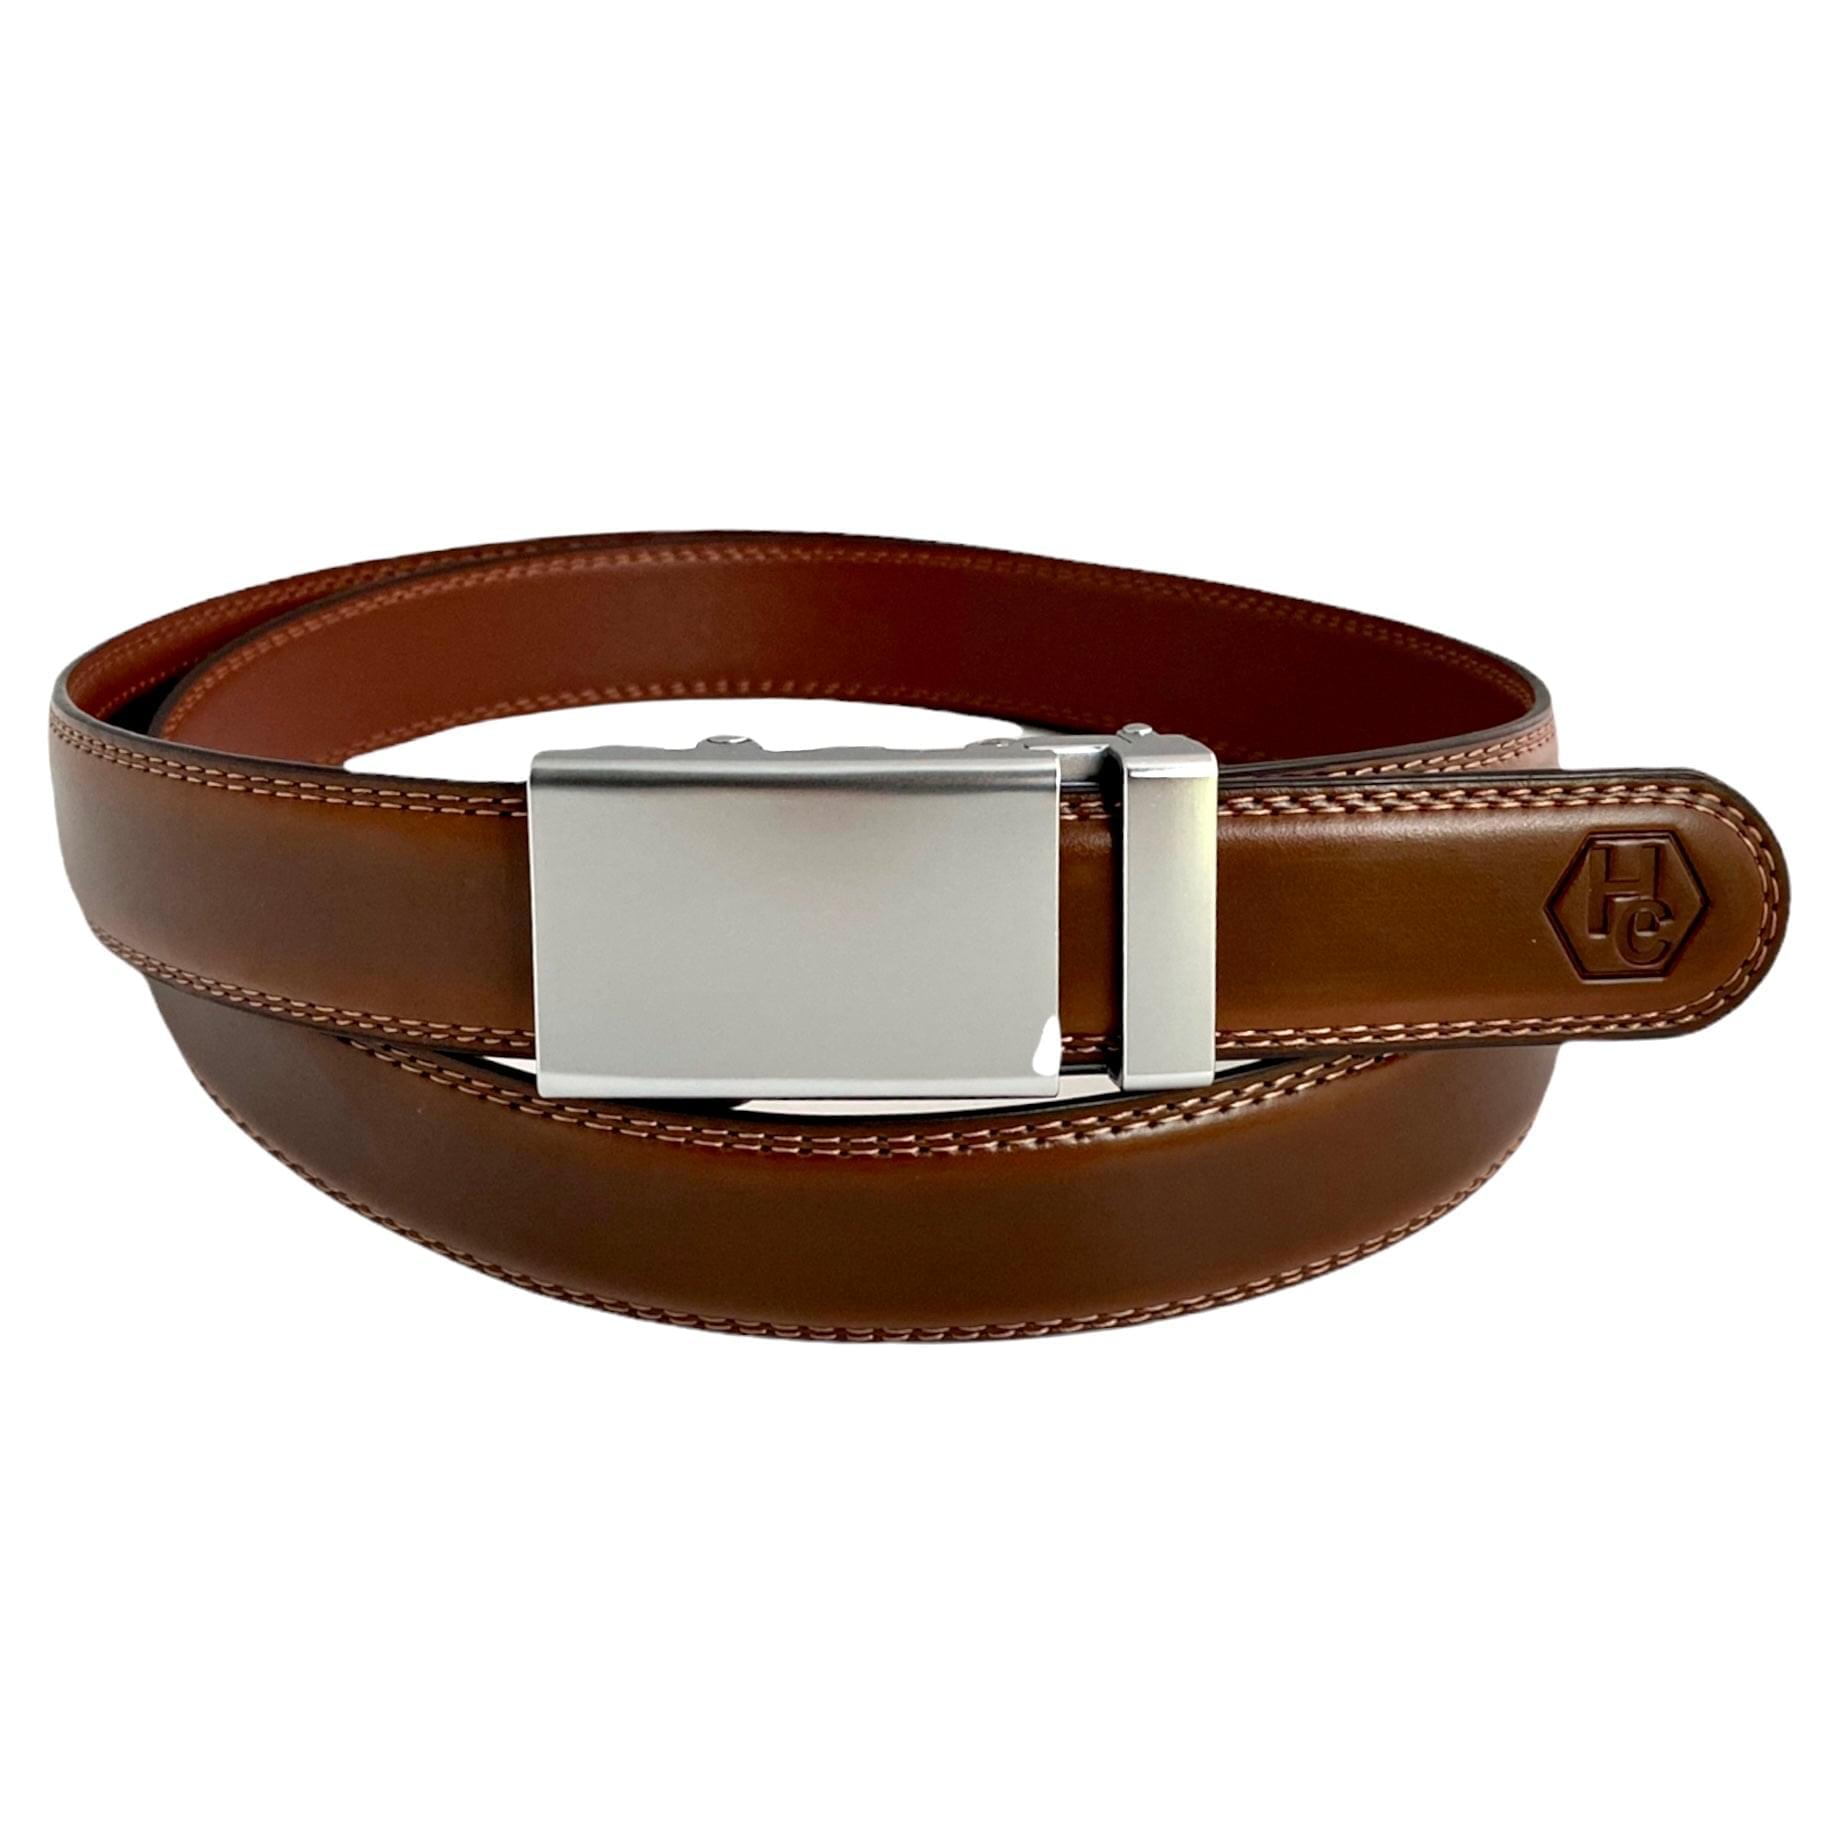 1.15" Genuine Leather Brown Strap And 1.15" Automatic Buckle Blue-Grey Folded Edges 31837641048215